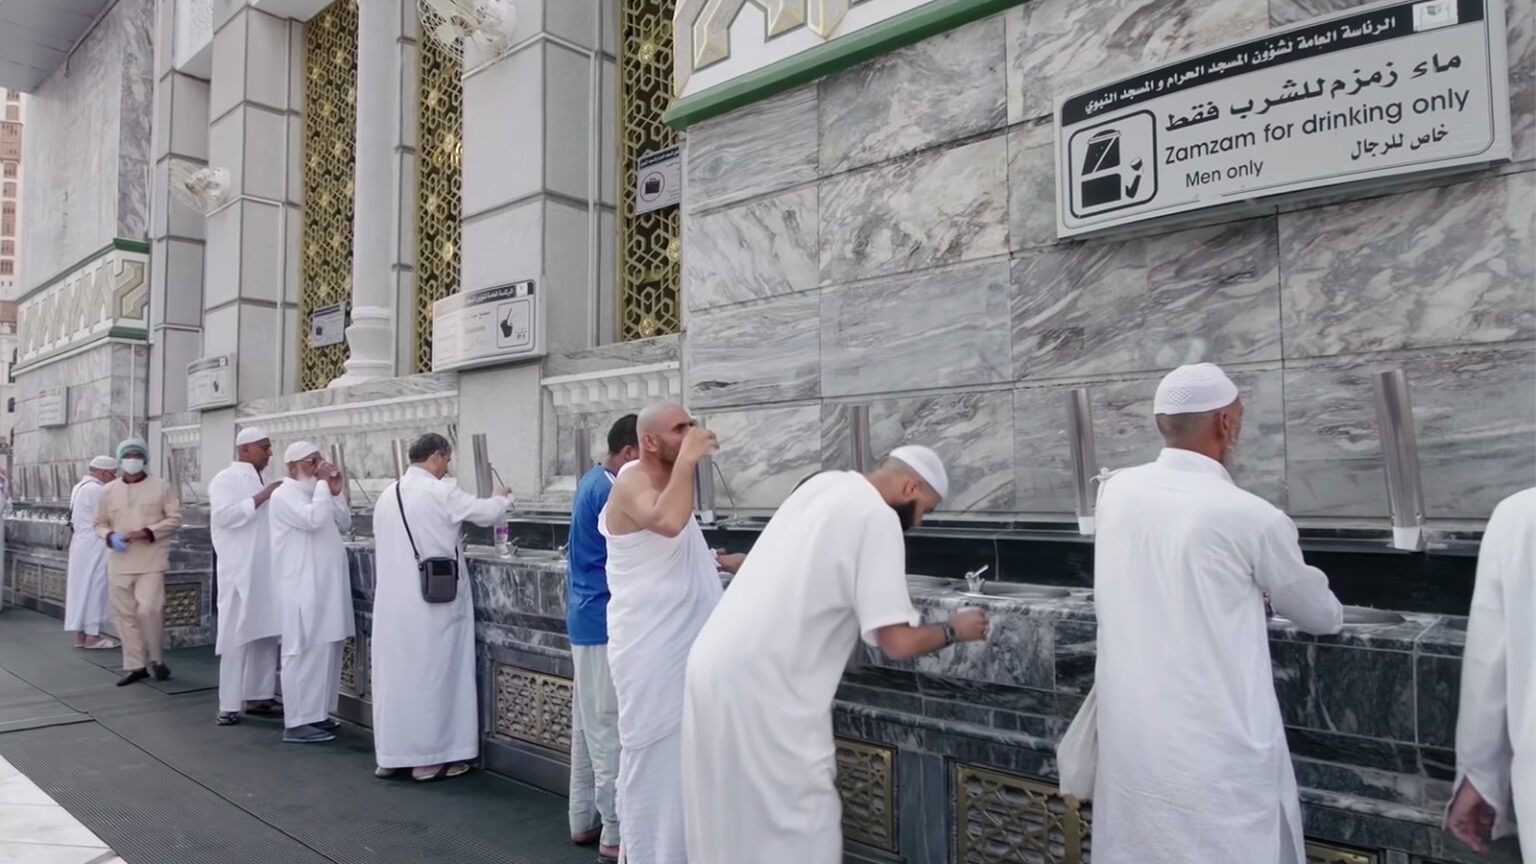 Like many hajj traditions in a pandemic year, Zamzam water gets a reboot